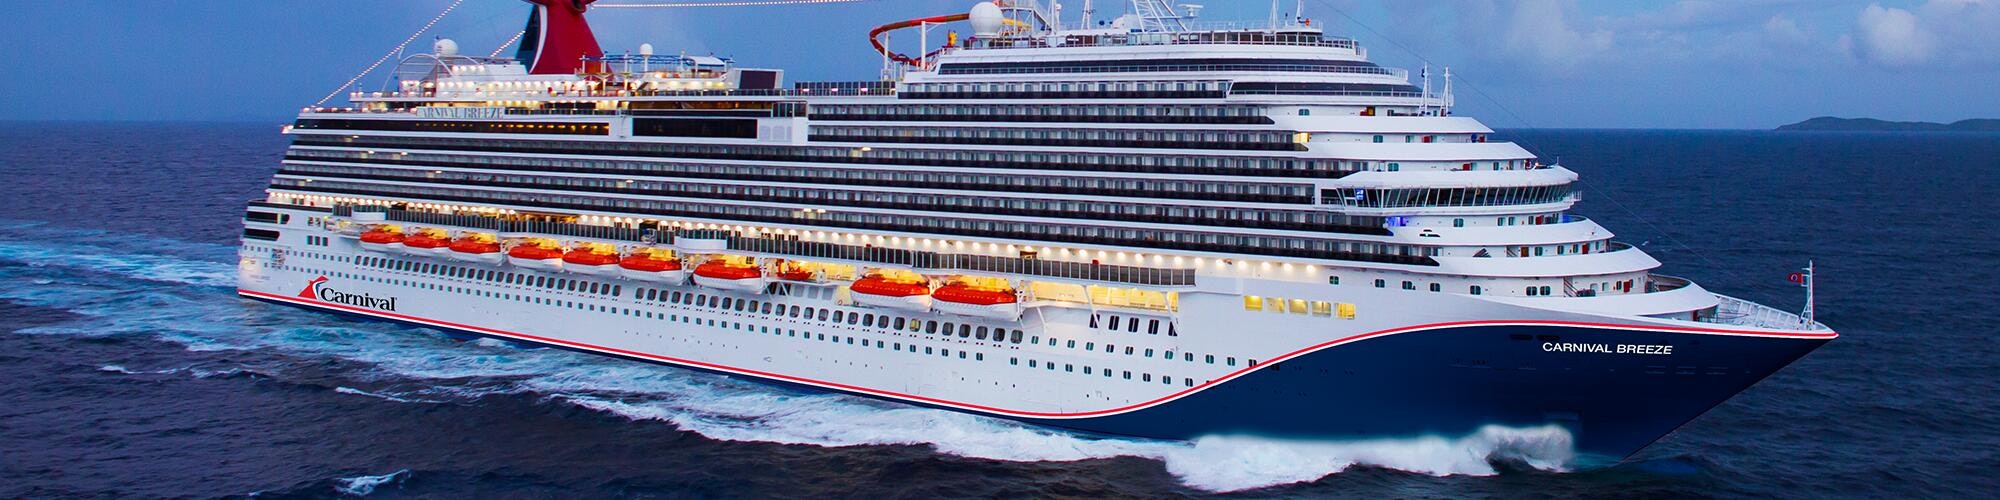 Upcoming Carnival Cruises 2023 Prices, Itineraries + Activities on Cruise Critic